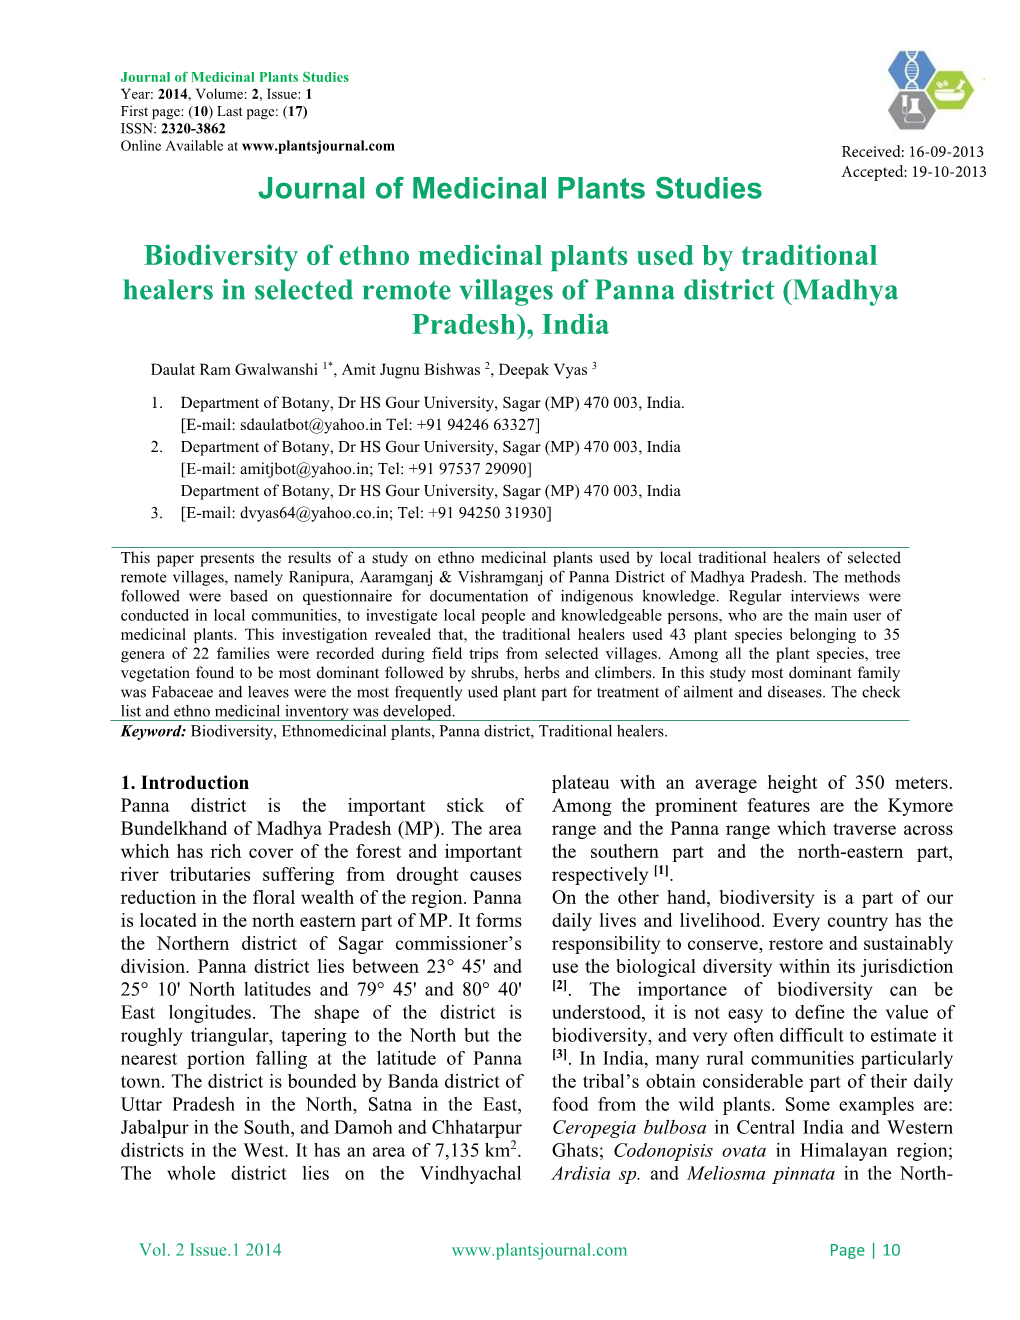 Journal of Medicinal Plants Studies Biodiversity of Ethno Medicinal Plants Used by Traditional Healers in Selected Remote Villag